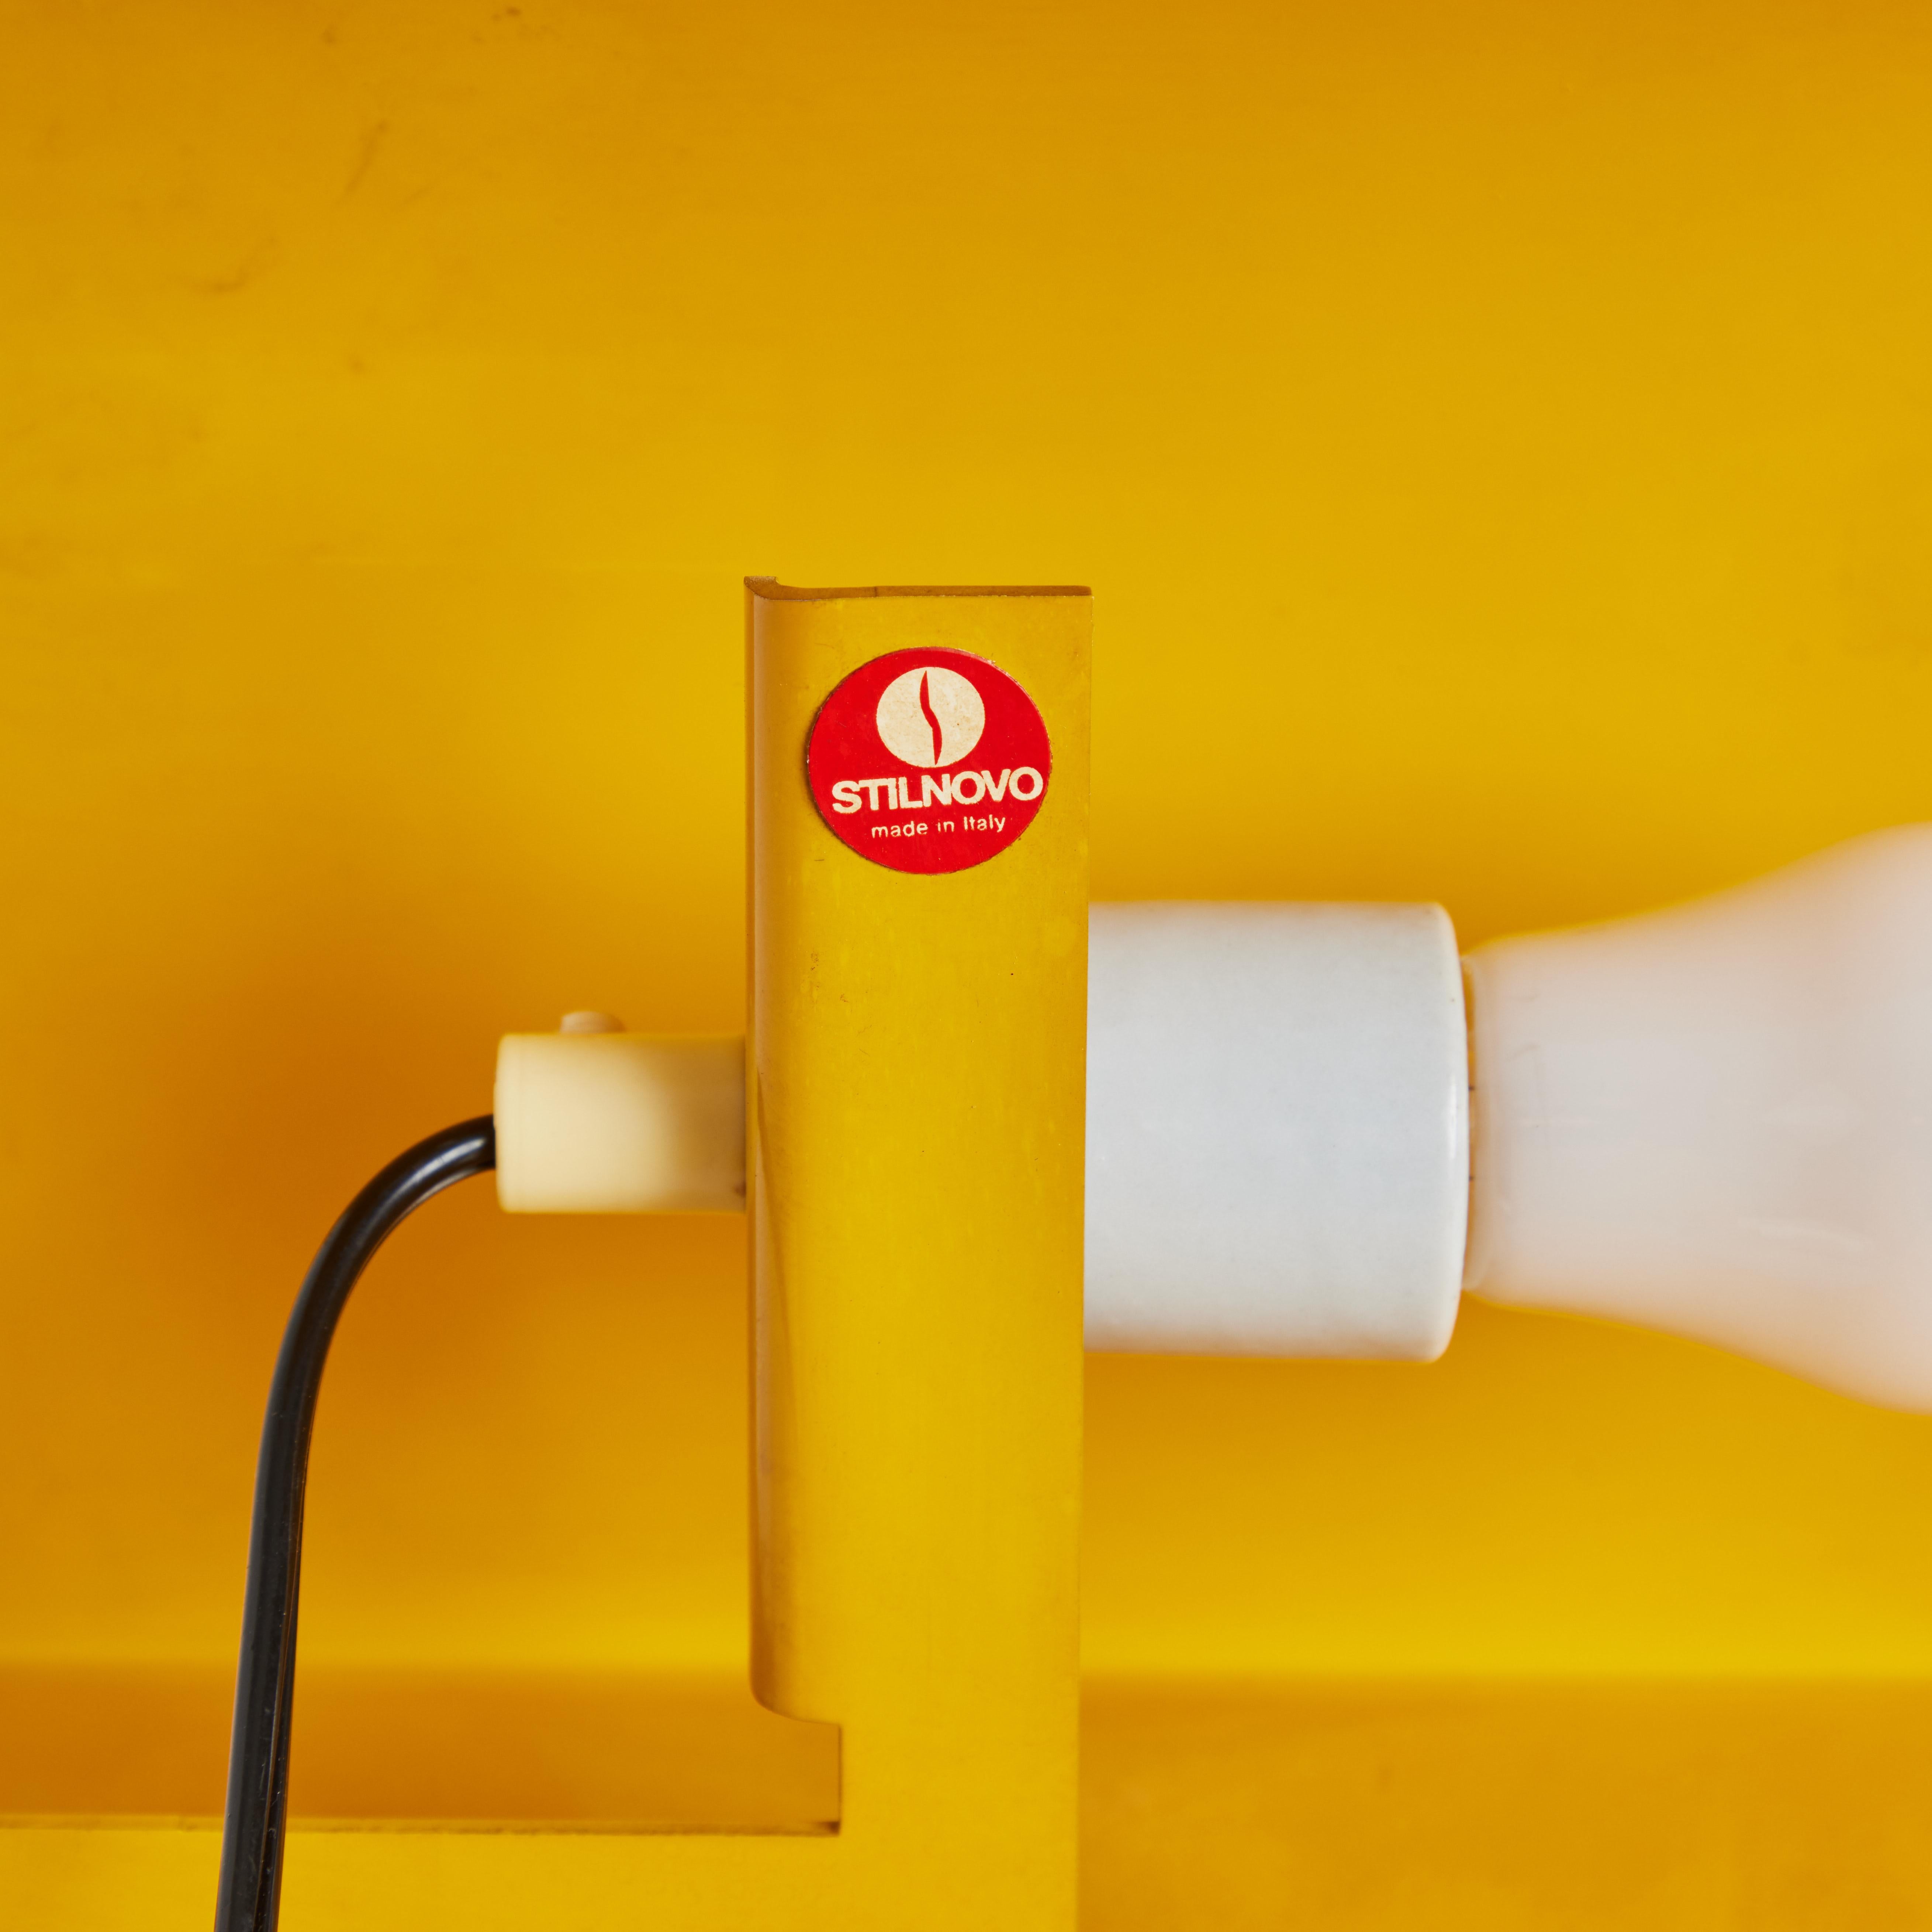 1972 Stilnovo 'Blitz' table lamp in yellow by Trabucco, Vecchi & Volpi. Executed in yellow lacquered steel, this ultra refined sculptural lamp was designed by the legendary team of Trabucchi & Vecchi & Volpi for Stilnovo, Italy. Retains original